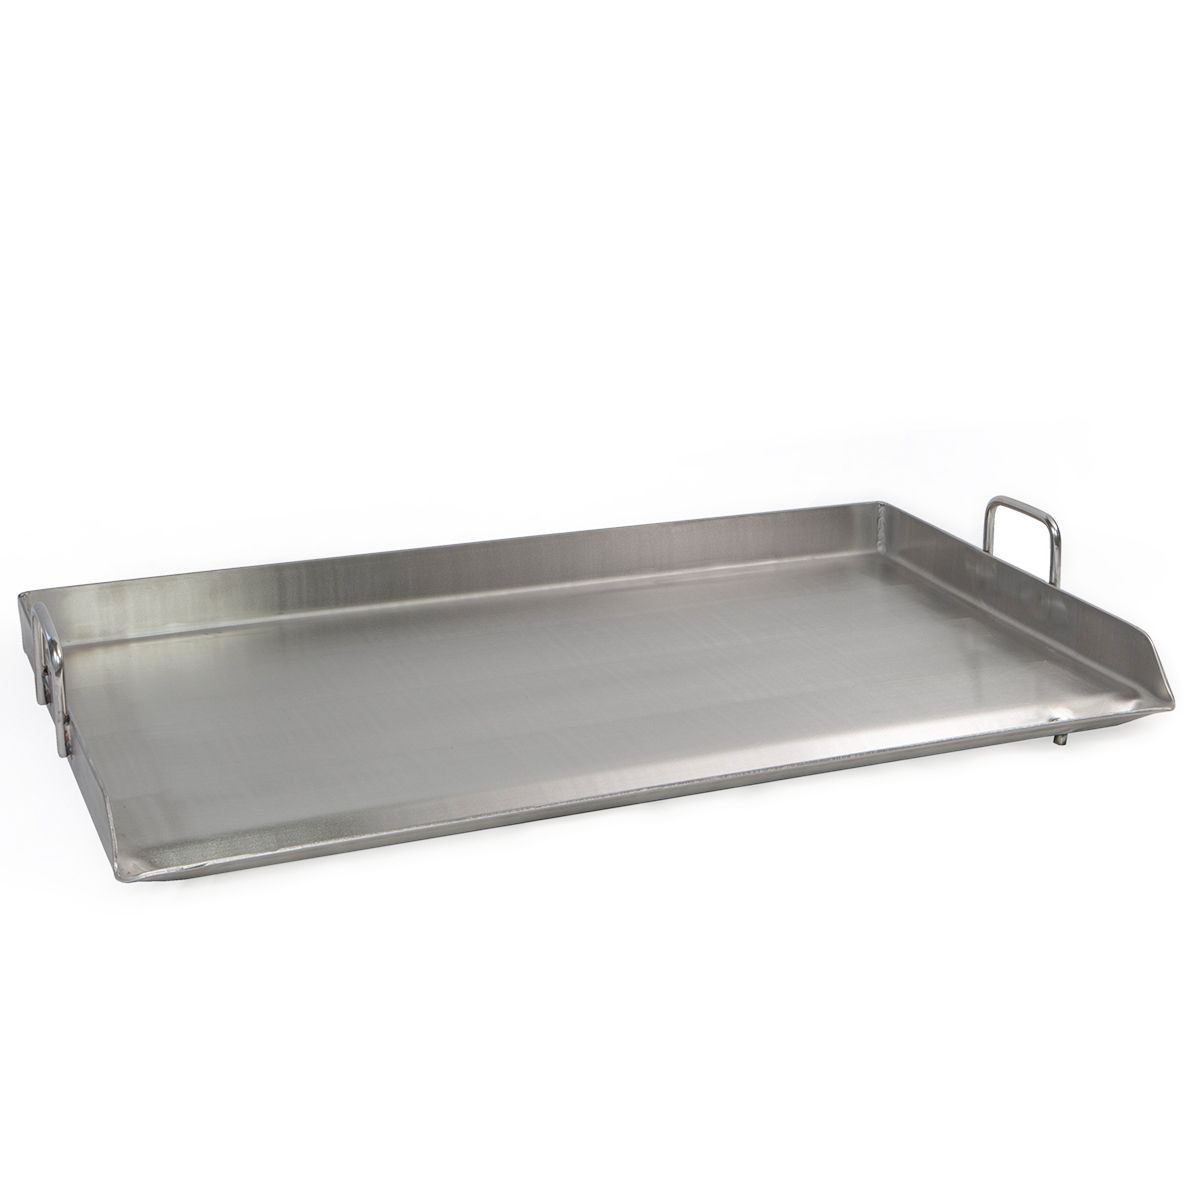 32" X 17" Flat Top Griddle for Stove - tool